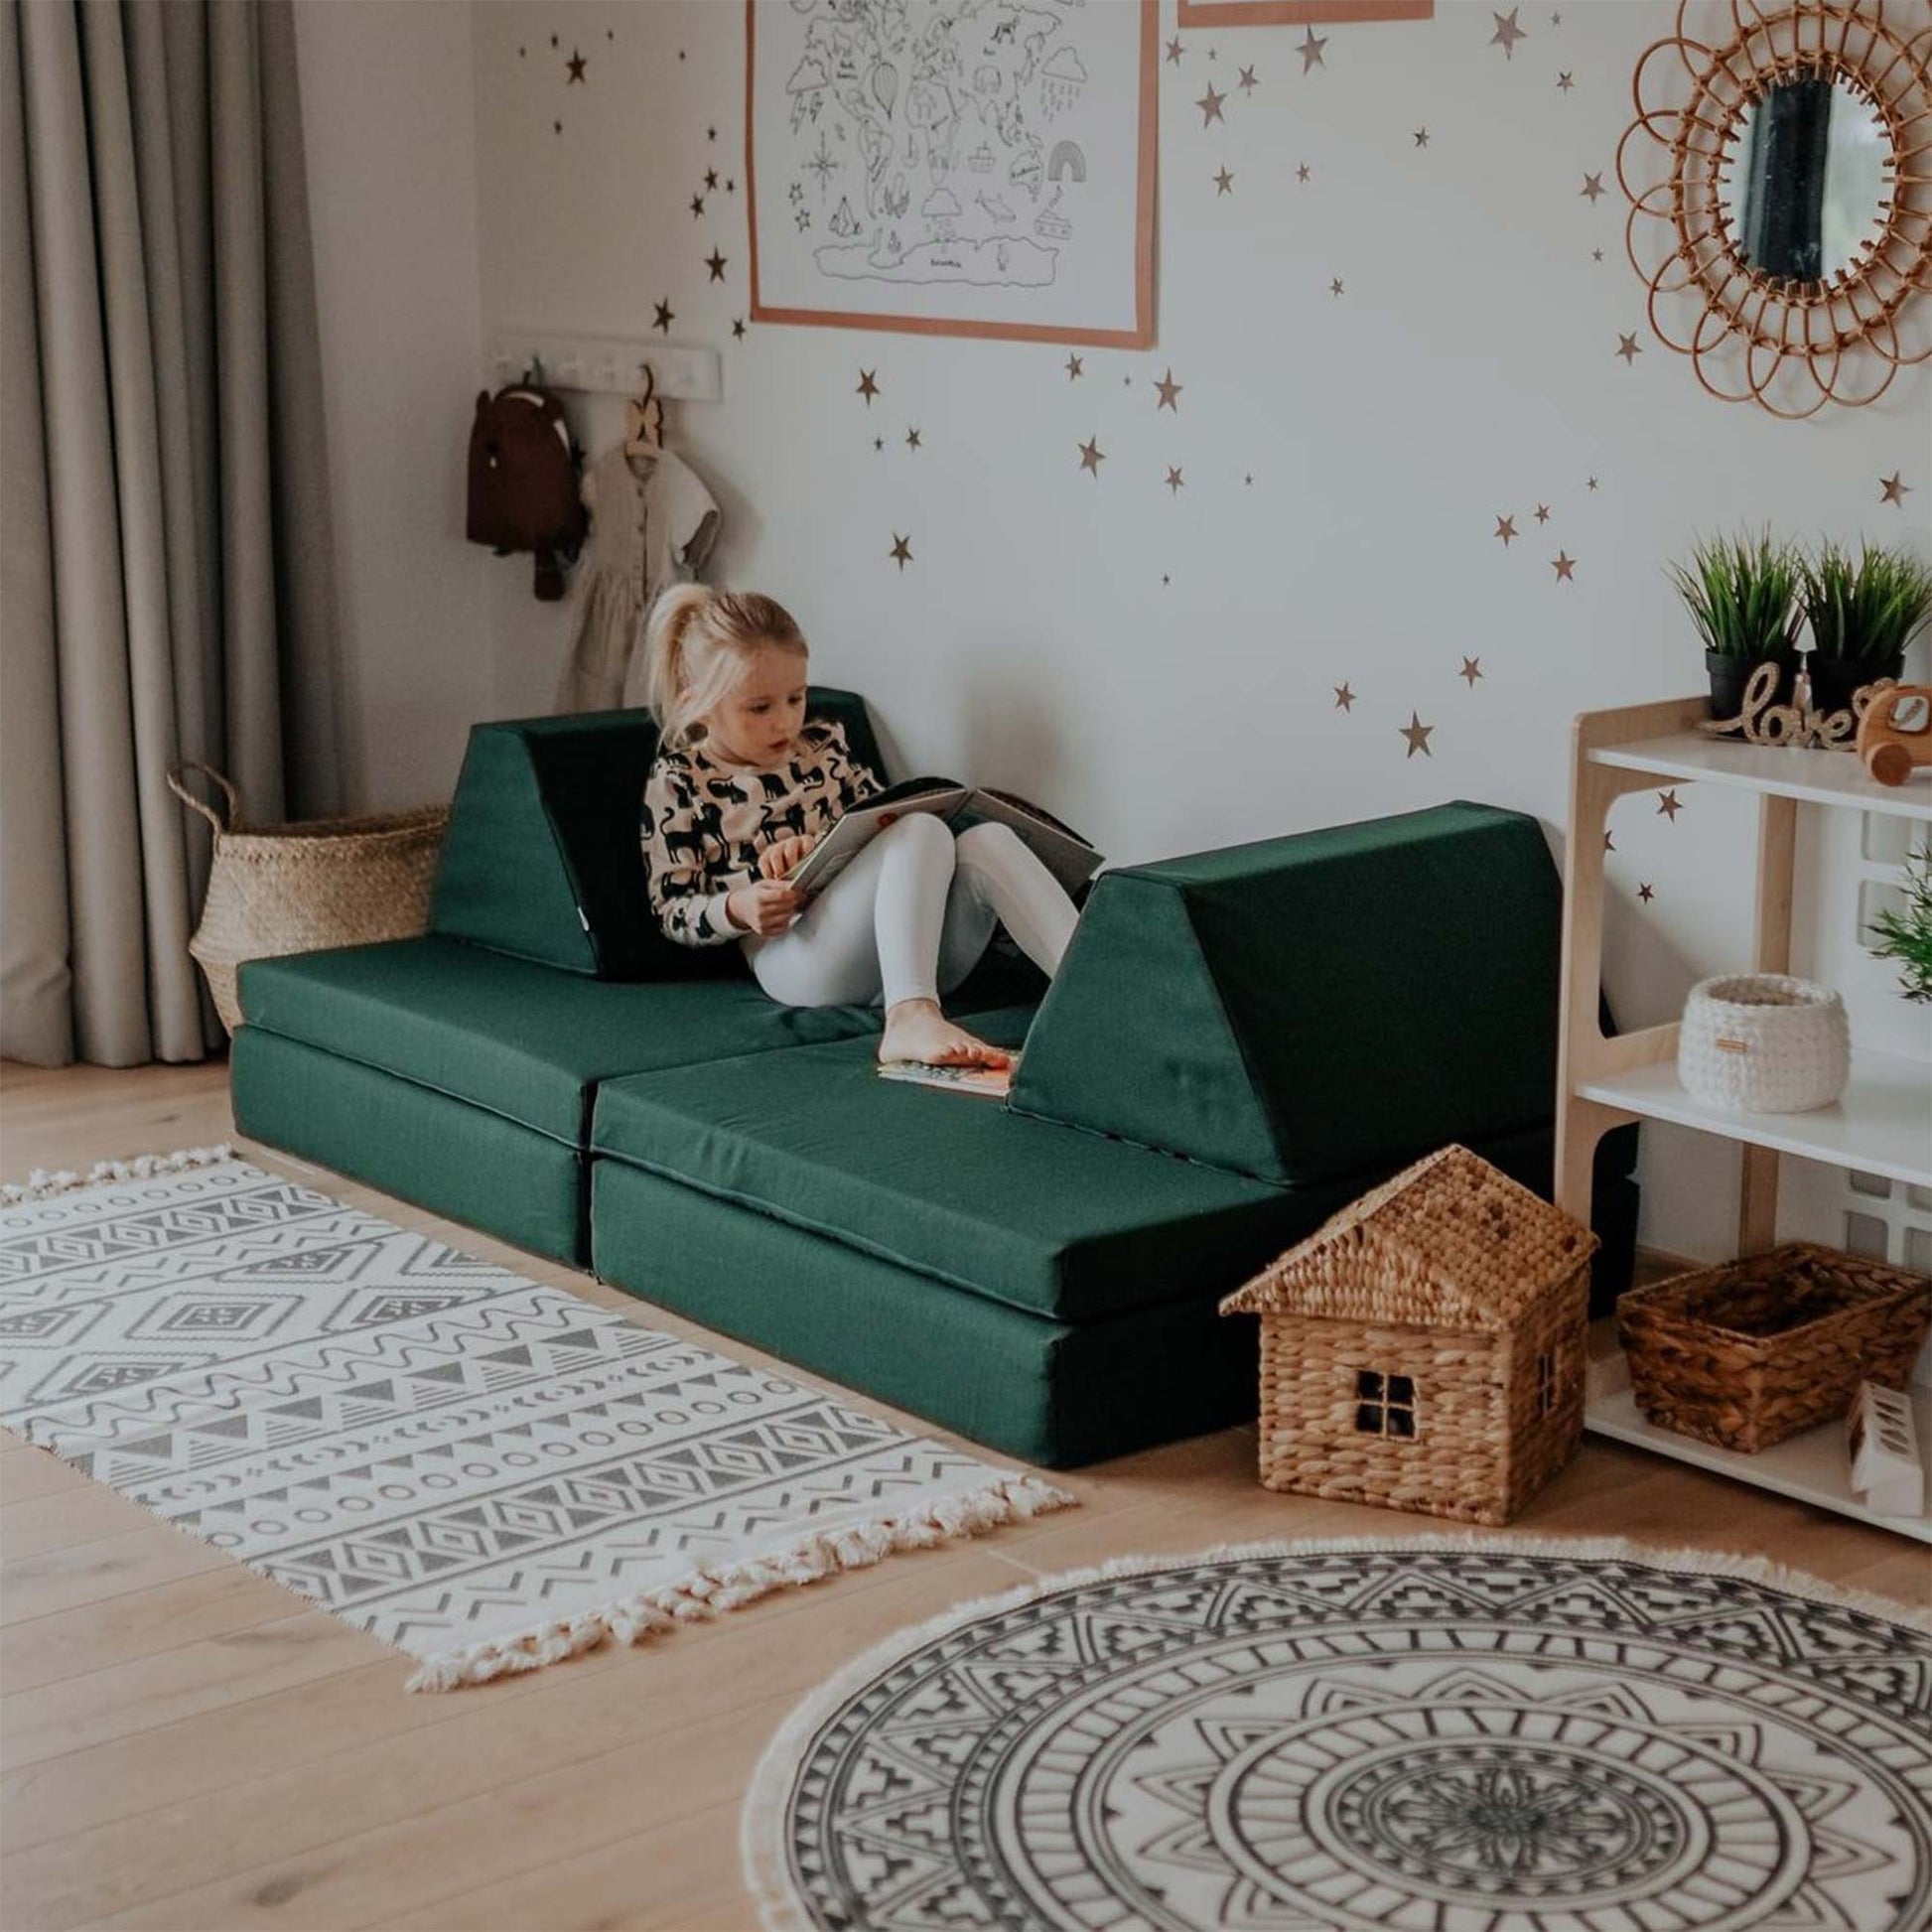 A girl reading a book while relaxing on her deep green Monboxy play sofa